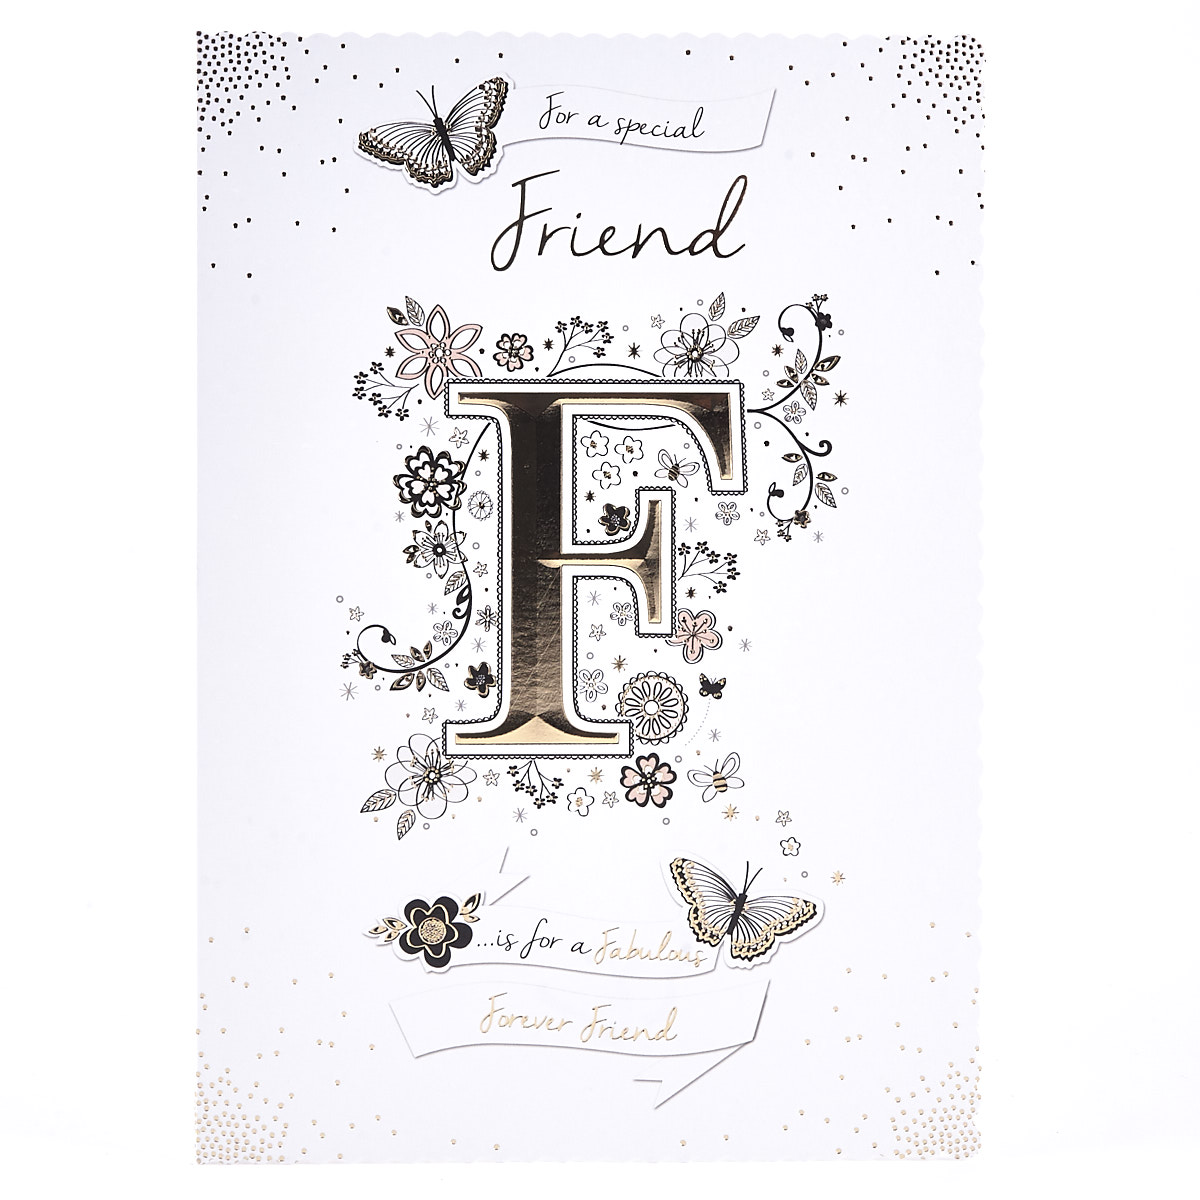 Special Friend Birthday Card - Fabulous Forever Friend